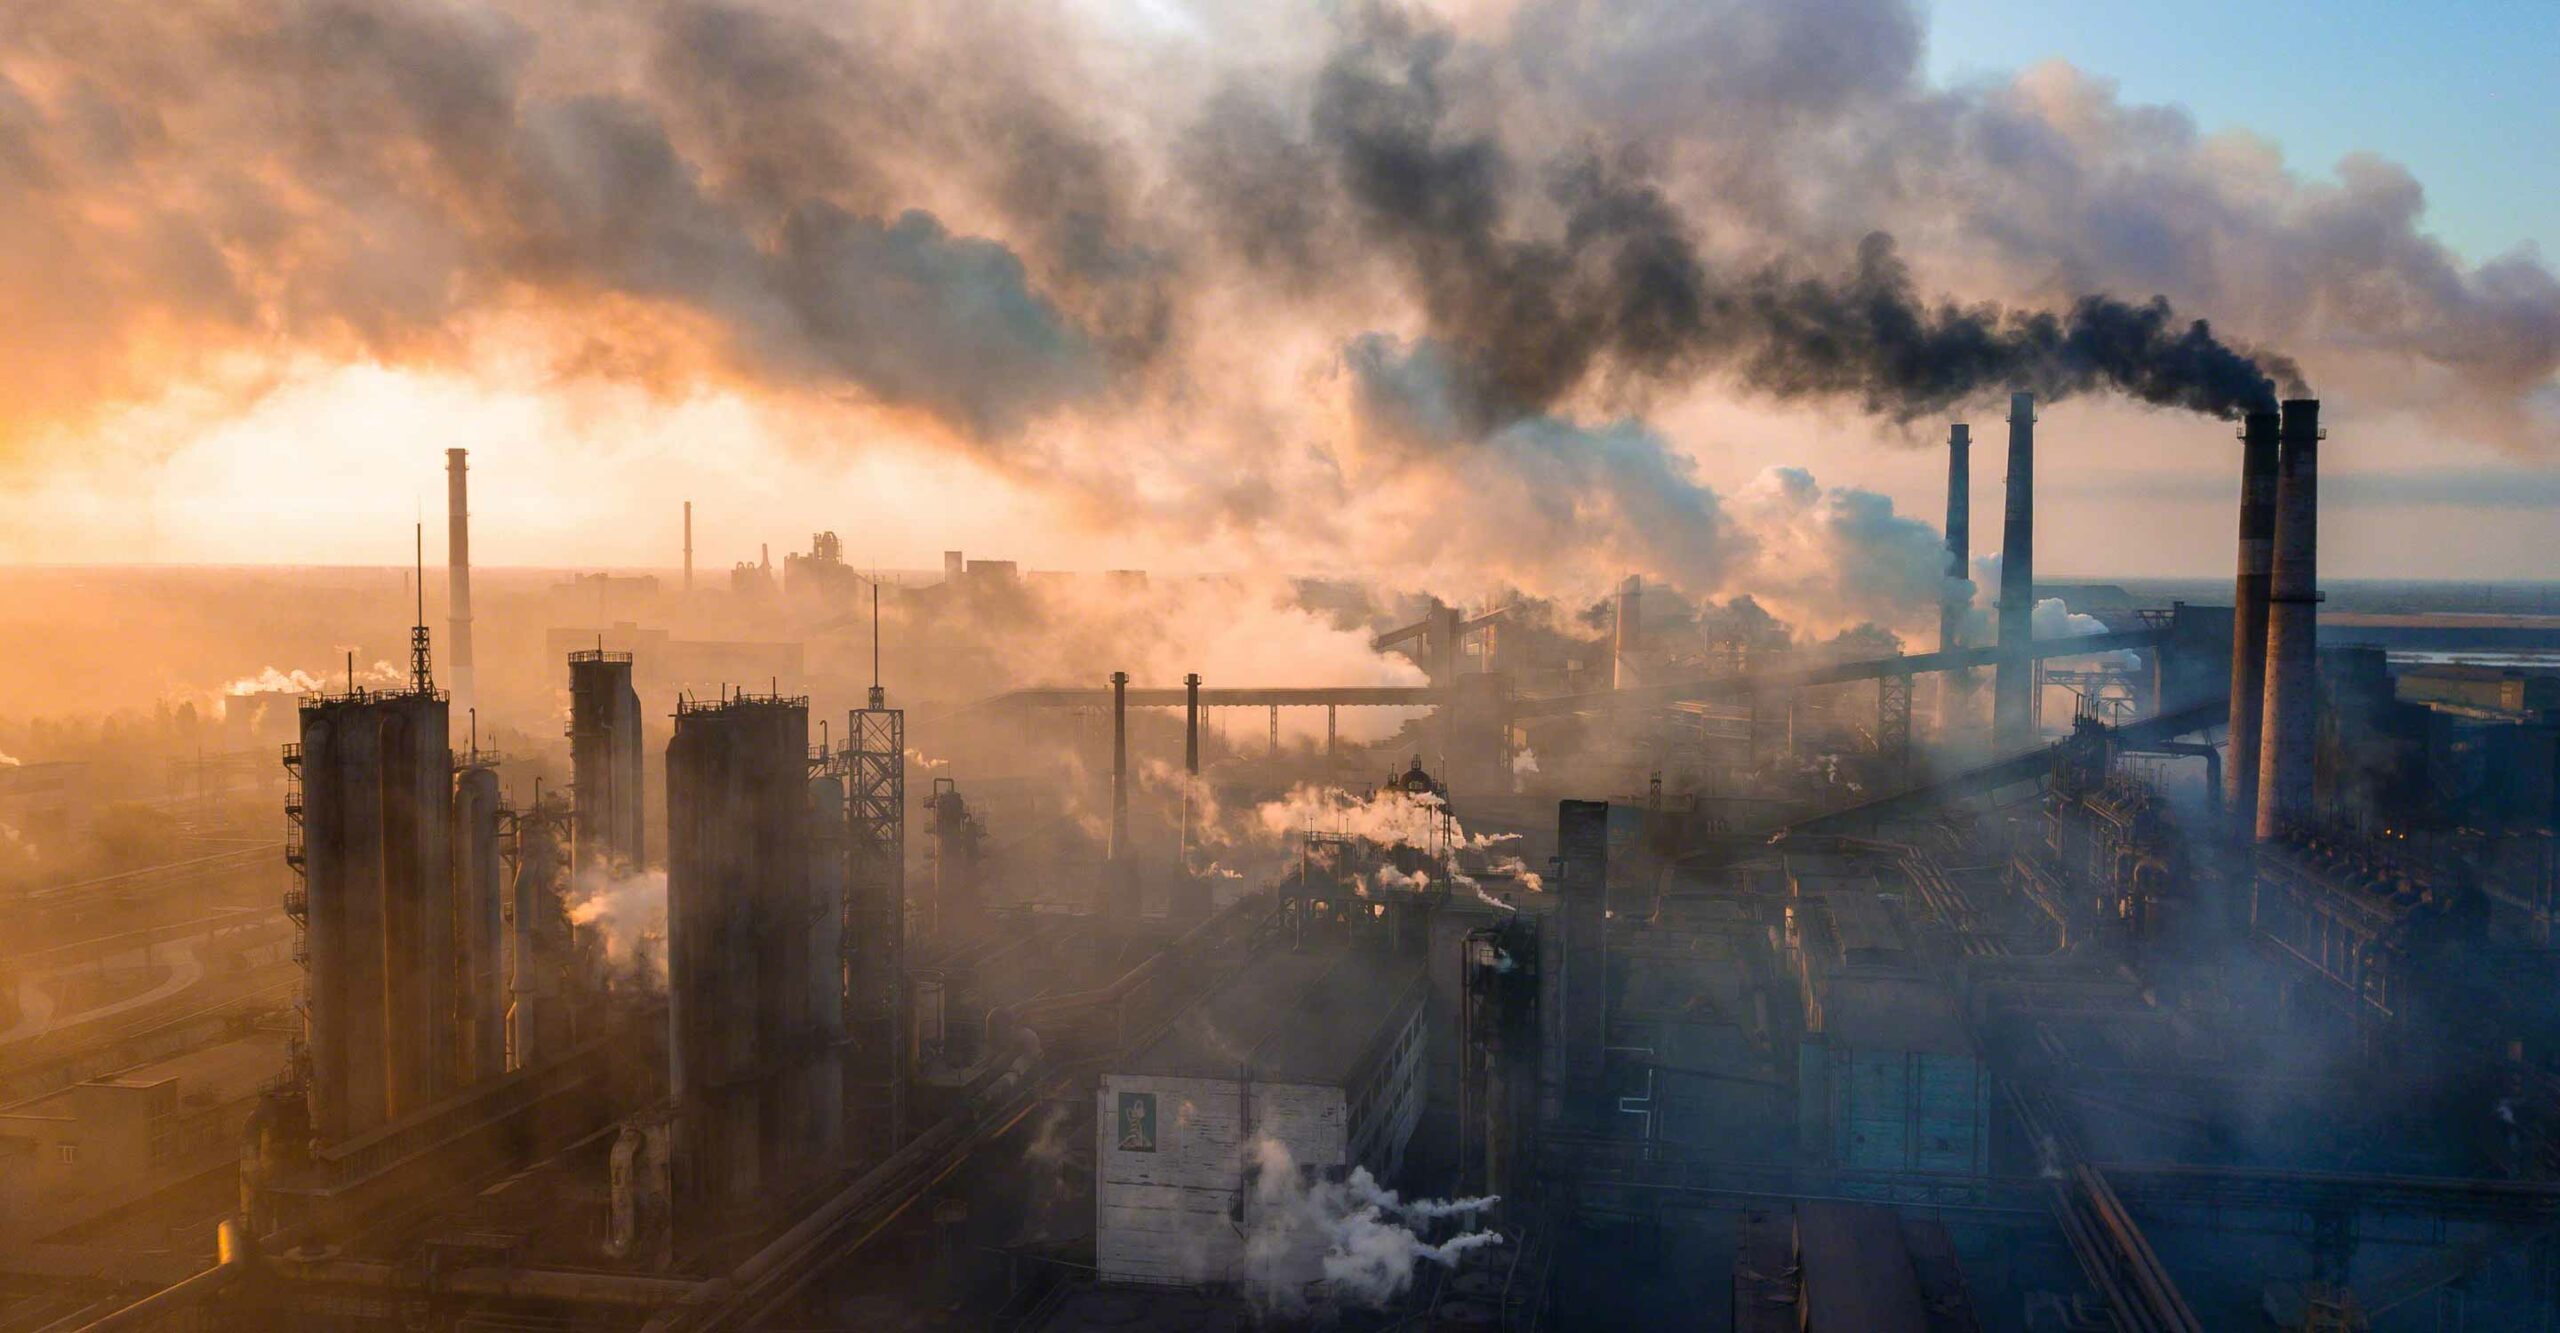 Alert Everyone! Air Pollution kills nearly seven million people every year